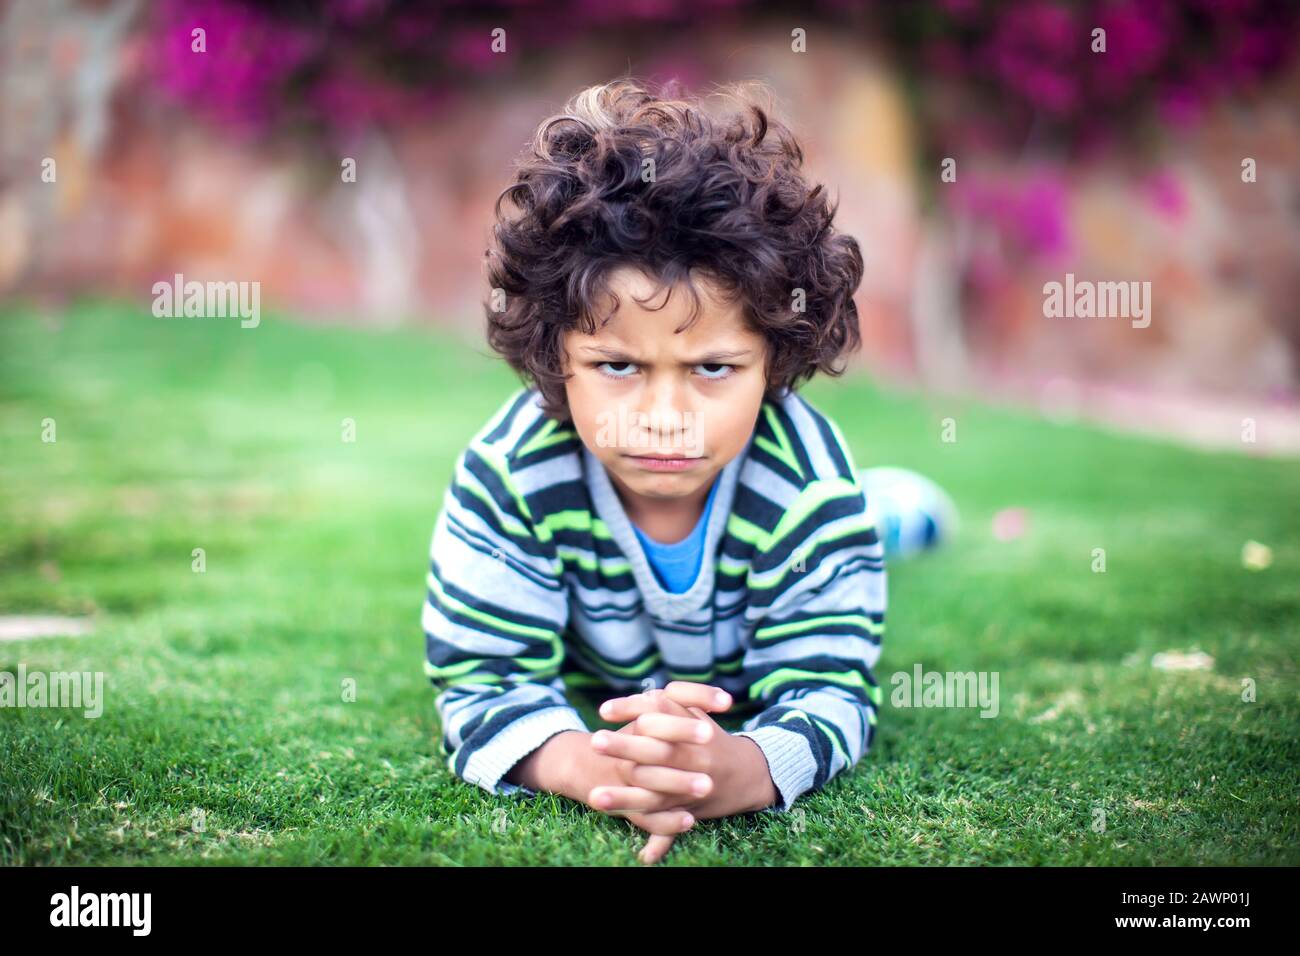 A portrait of sad kid boy looking at camera. Children and emotions concept Stock Photo